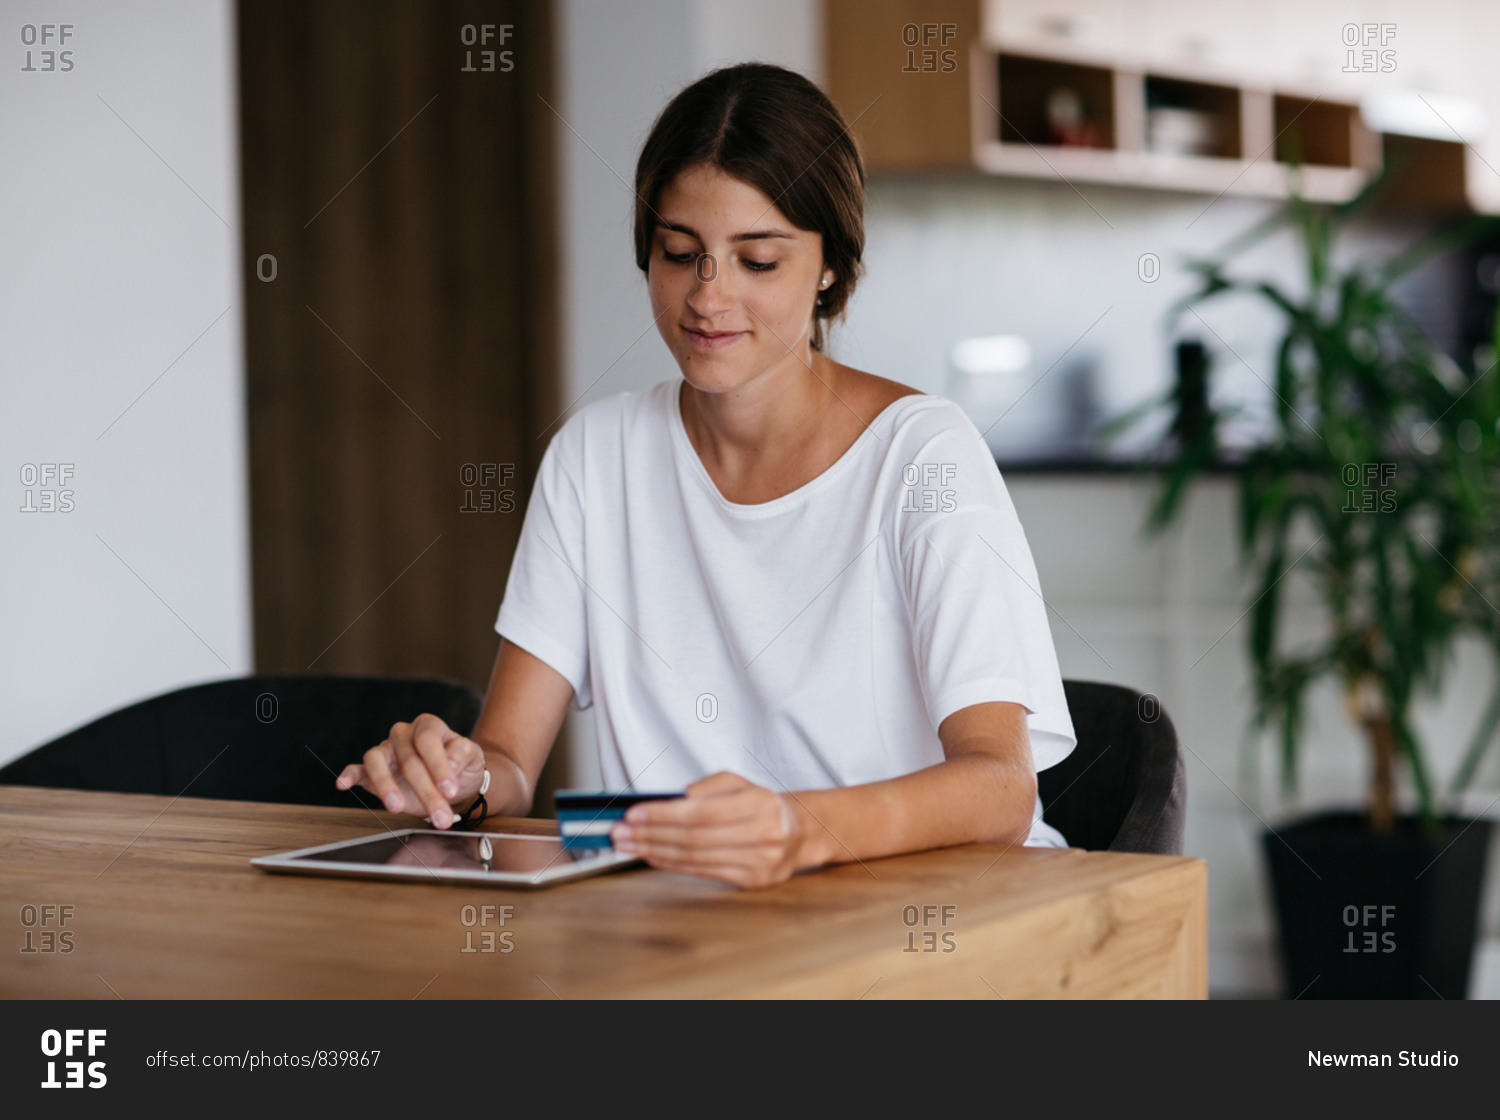 Online payment - young woman paying online with credit card at home. Cheerful woman paying bills online using digital tablet.